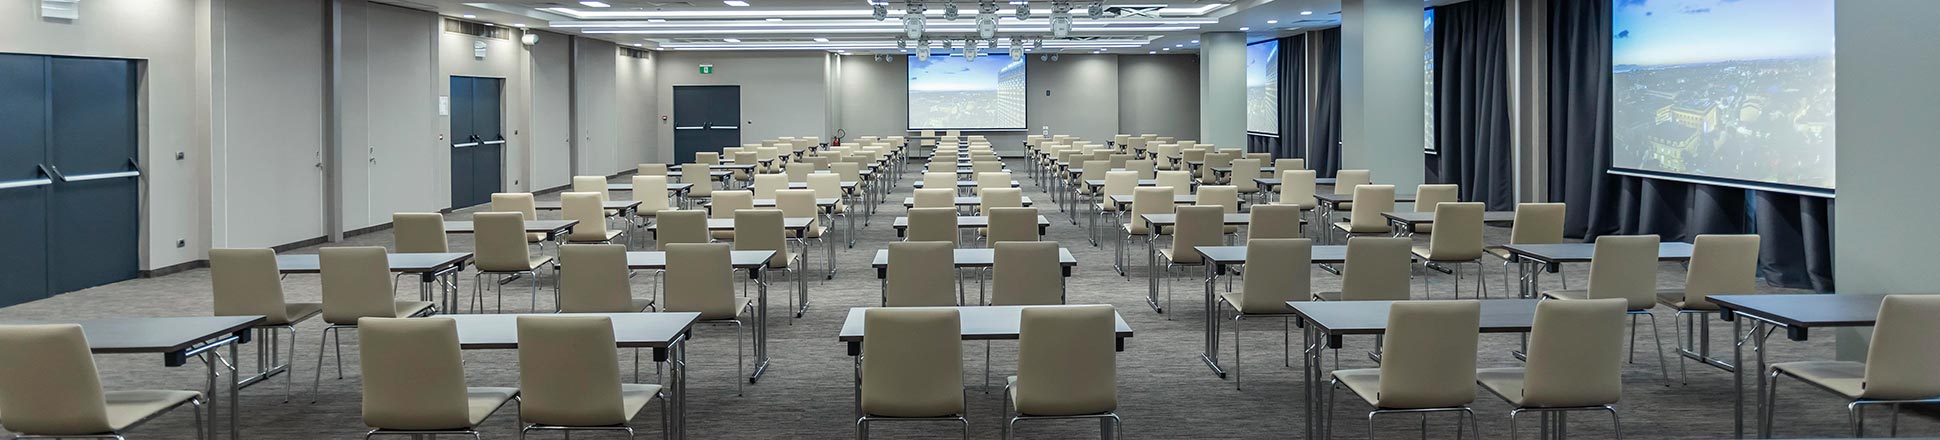 Actual photo of the conference room